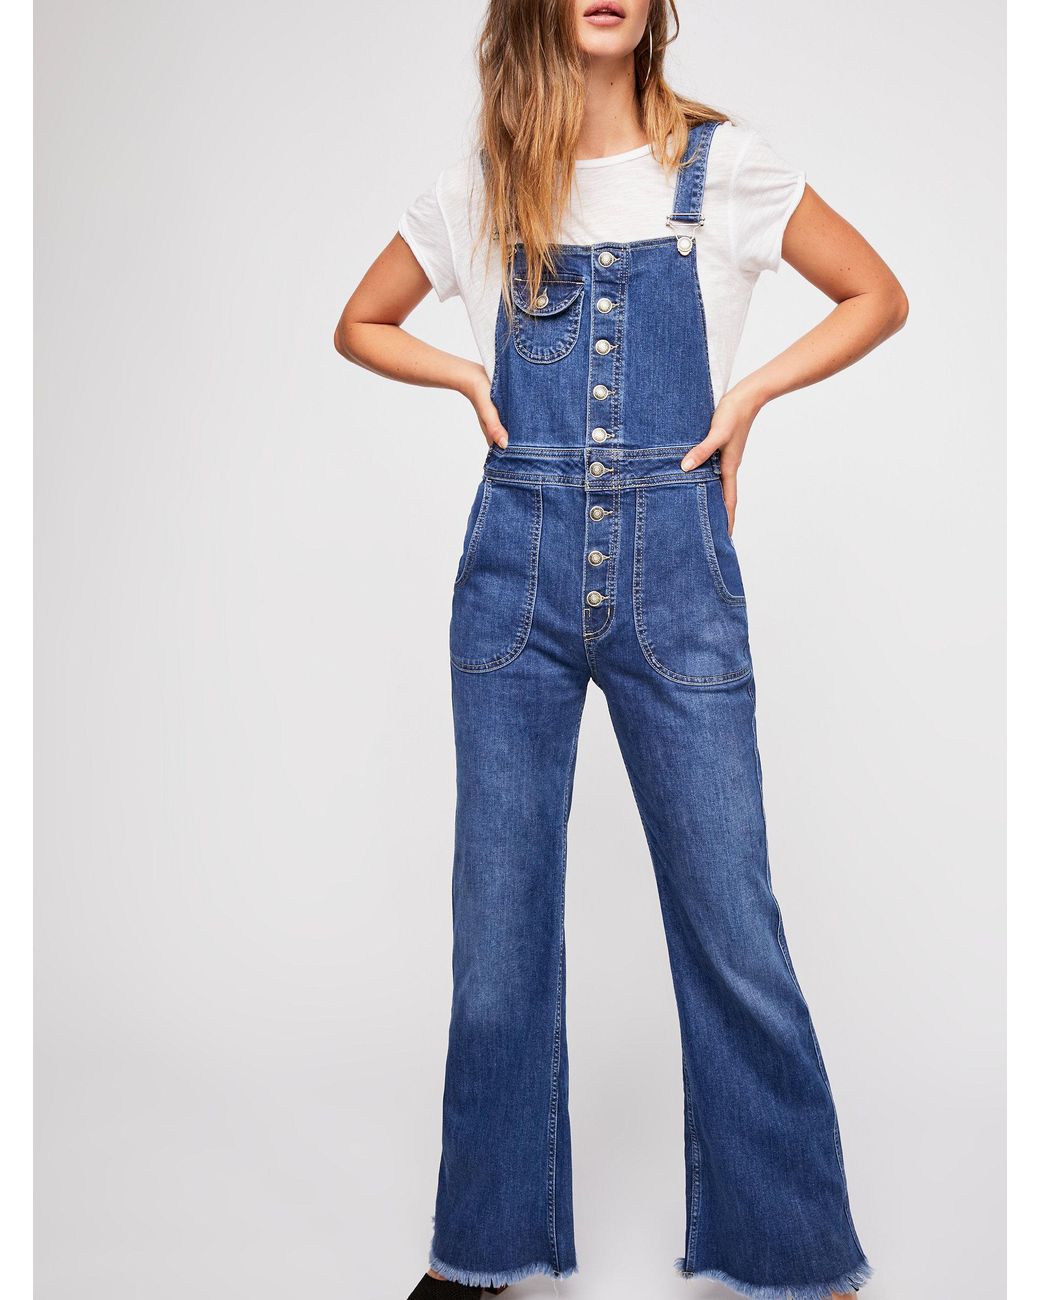 Free People Alvin Flared Overalls in Blue